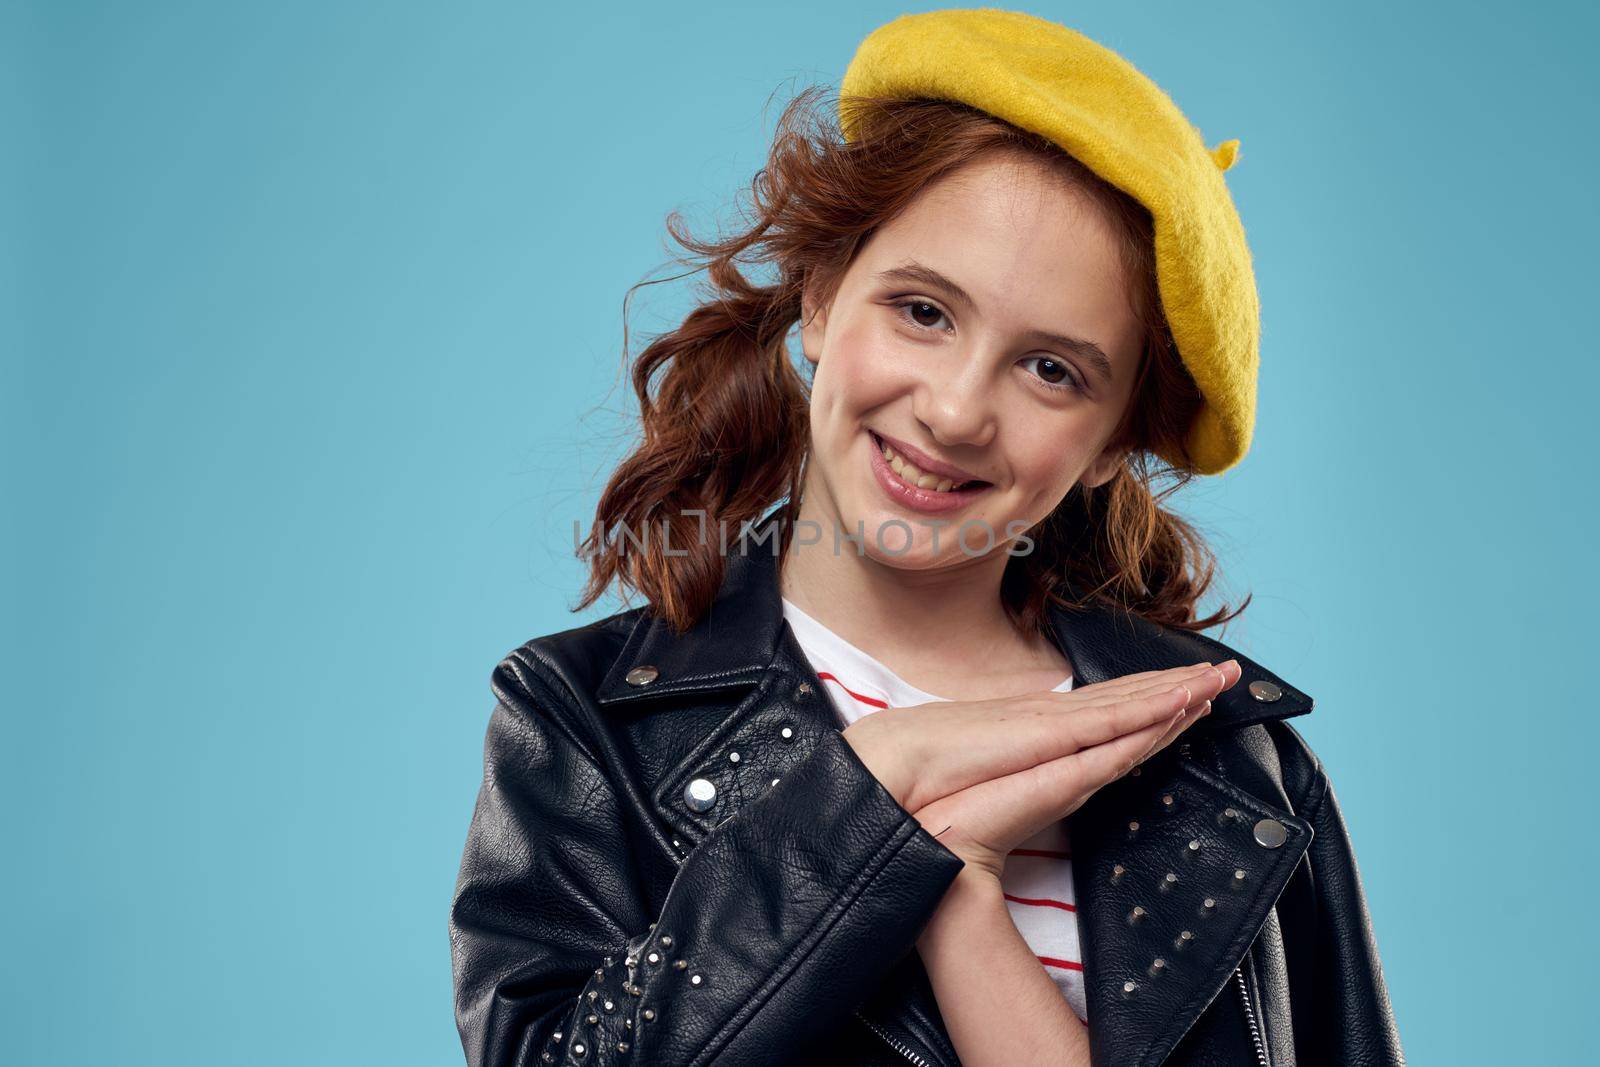 A fashionable girl in a leather jacket and a yellow hat on a blue background gestures with her hands emotions by SHOTPRIME